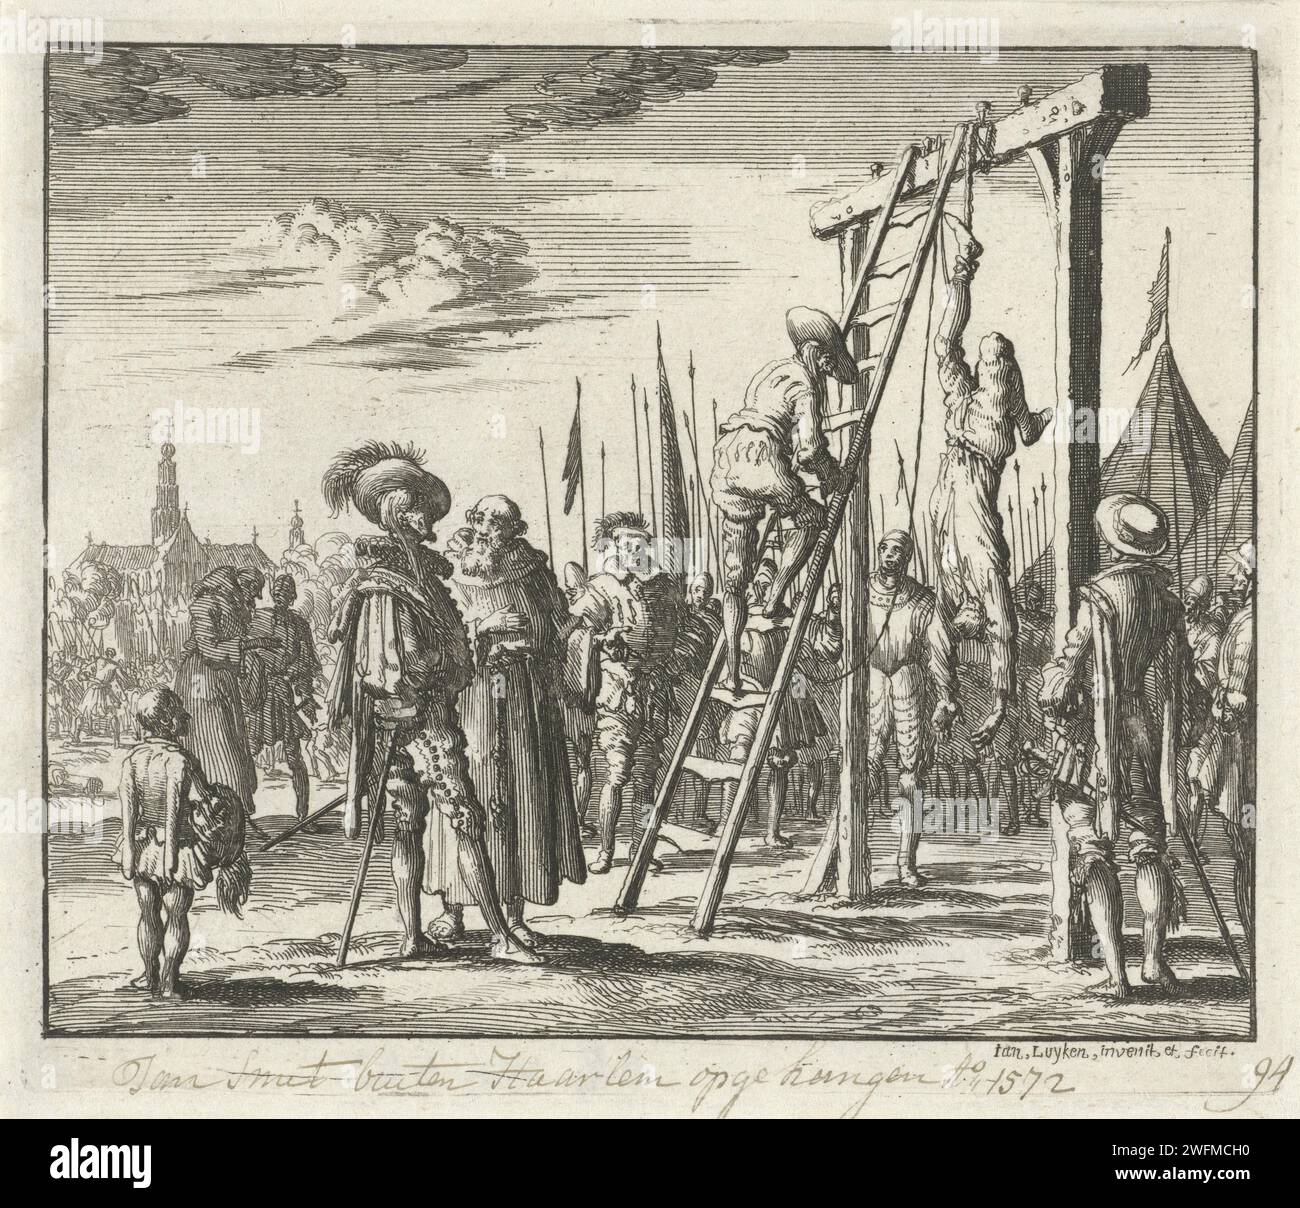 Jan Smit in Haarlem hung on one leg, 1572, Jan Luyken, 1685 print  Amsterdam paper etching execution of heretic, e.g. by burning at the stake, 'auto-da-fé' Haarlem Stock Photo